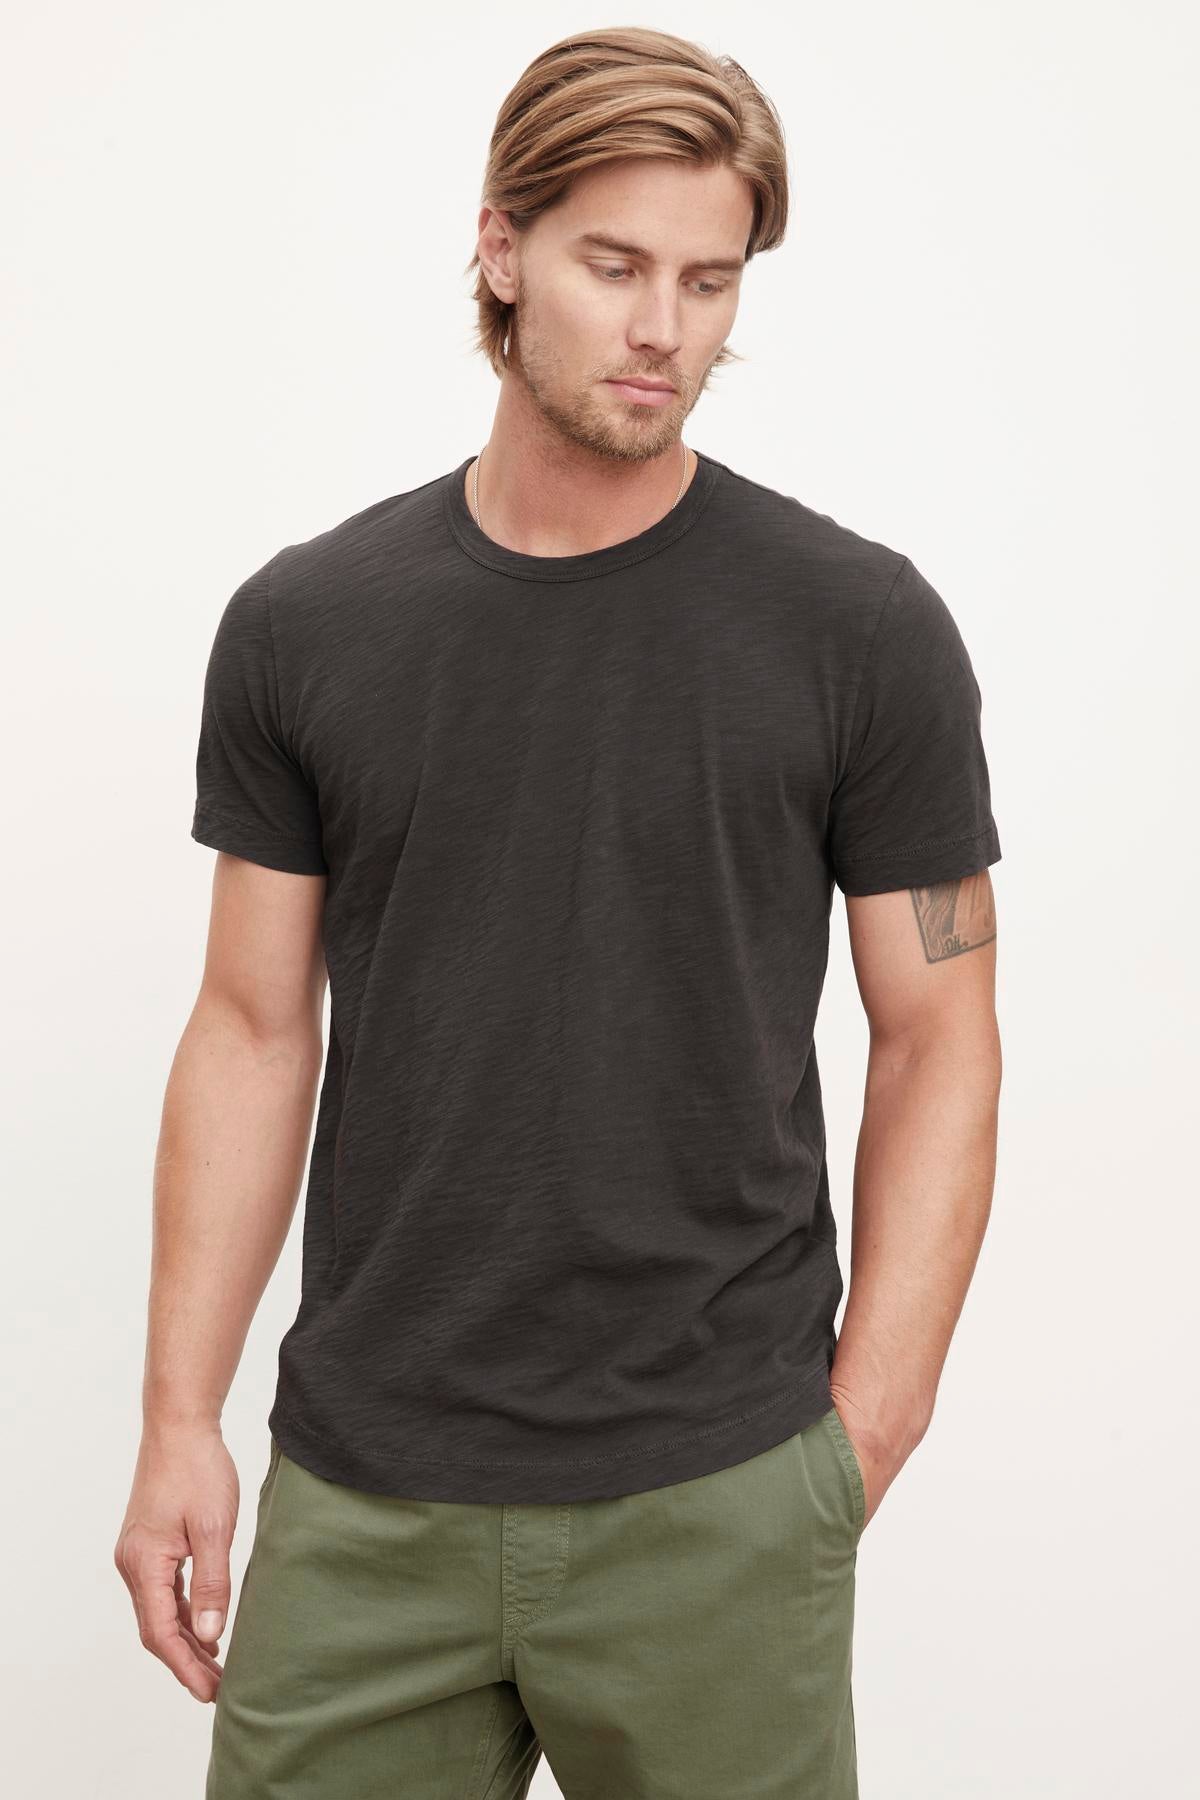 A man with blond hair wearing a Velvet by Graham & Spencer AMARO TEE and olive green pants, standing against a plain background.-36805193400513